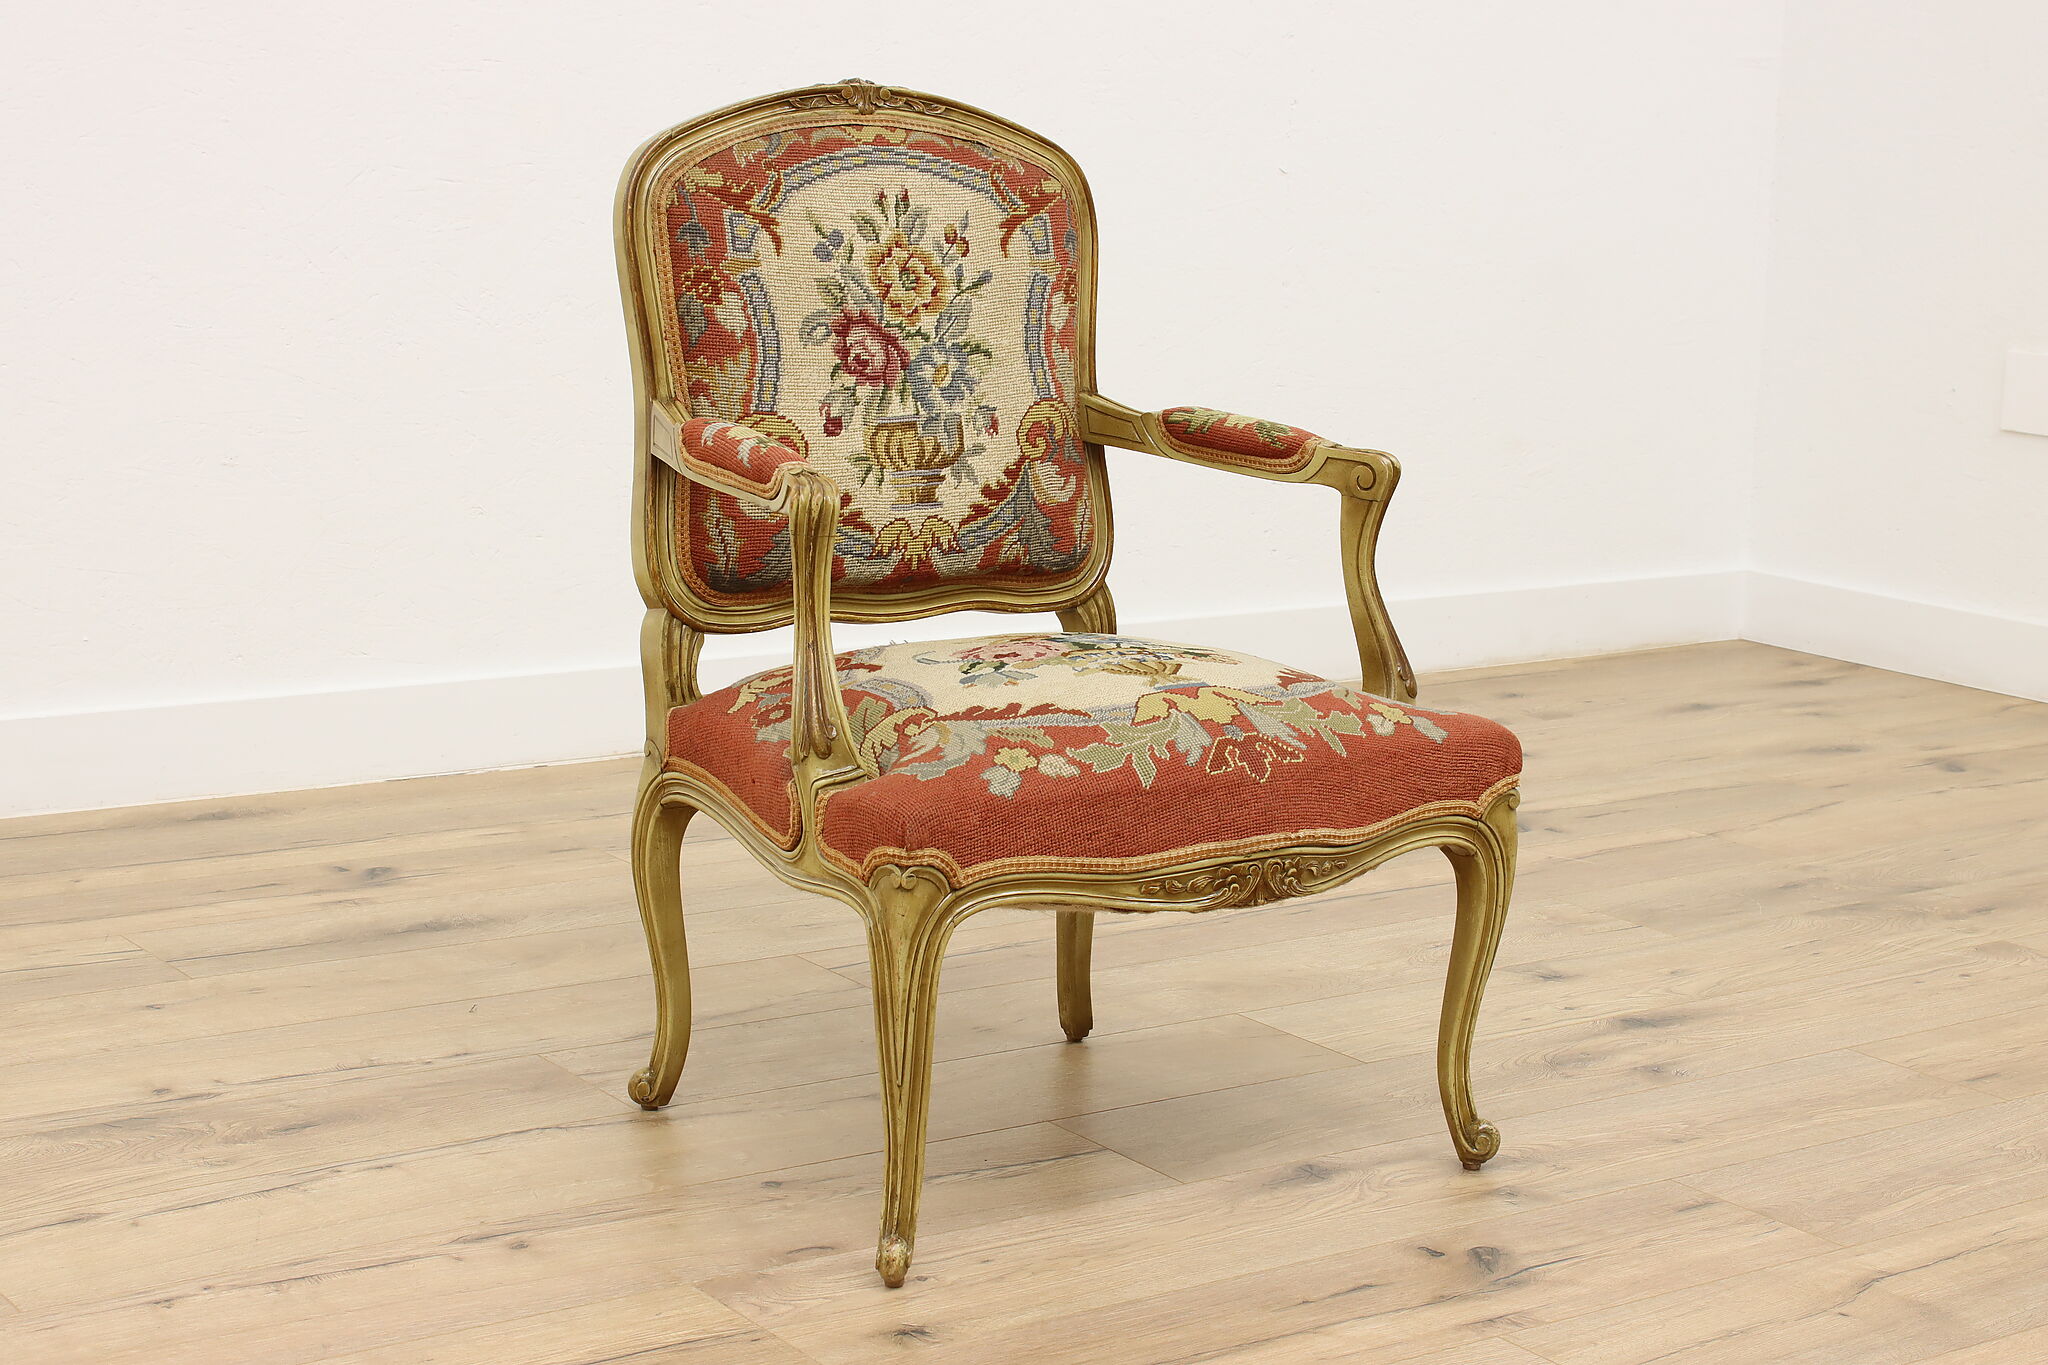 Whole Sale High Grade Quality Wood Antique French Louis Xv Chair